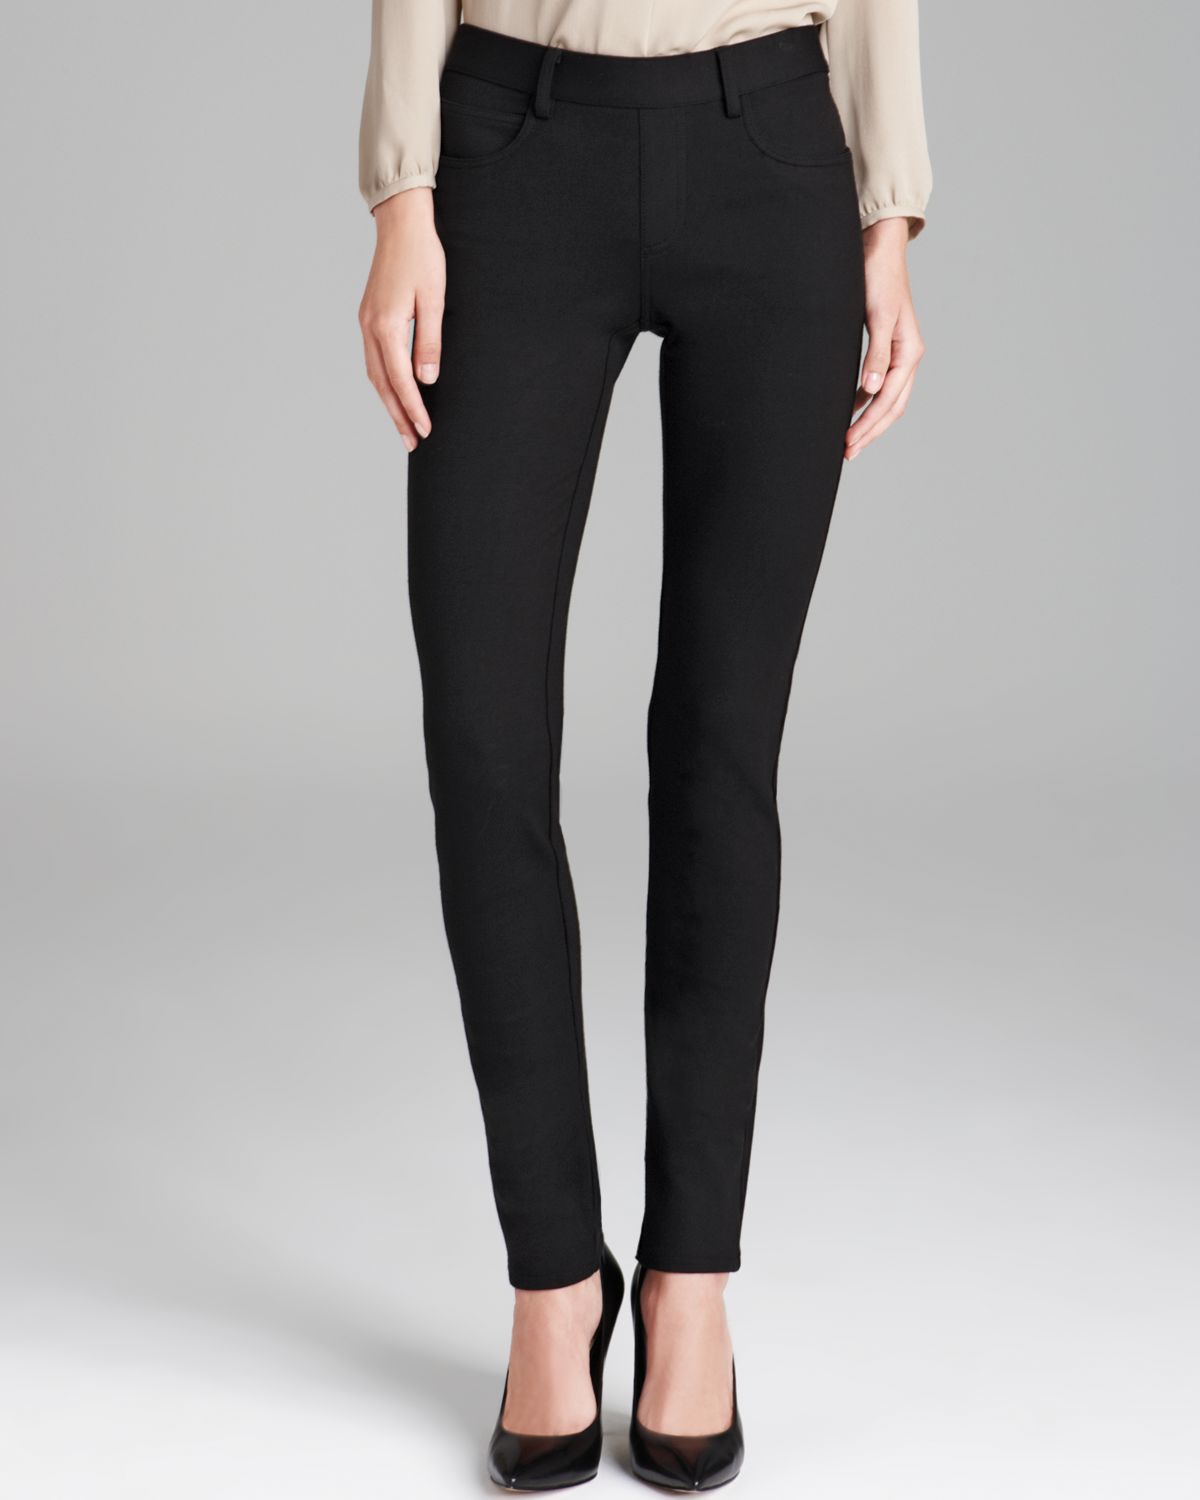 Lyst - Theory Pants - Elly 2 Classical in Black